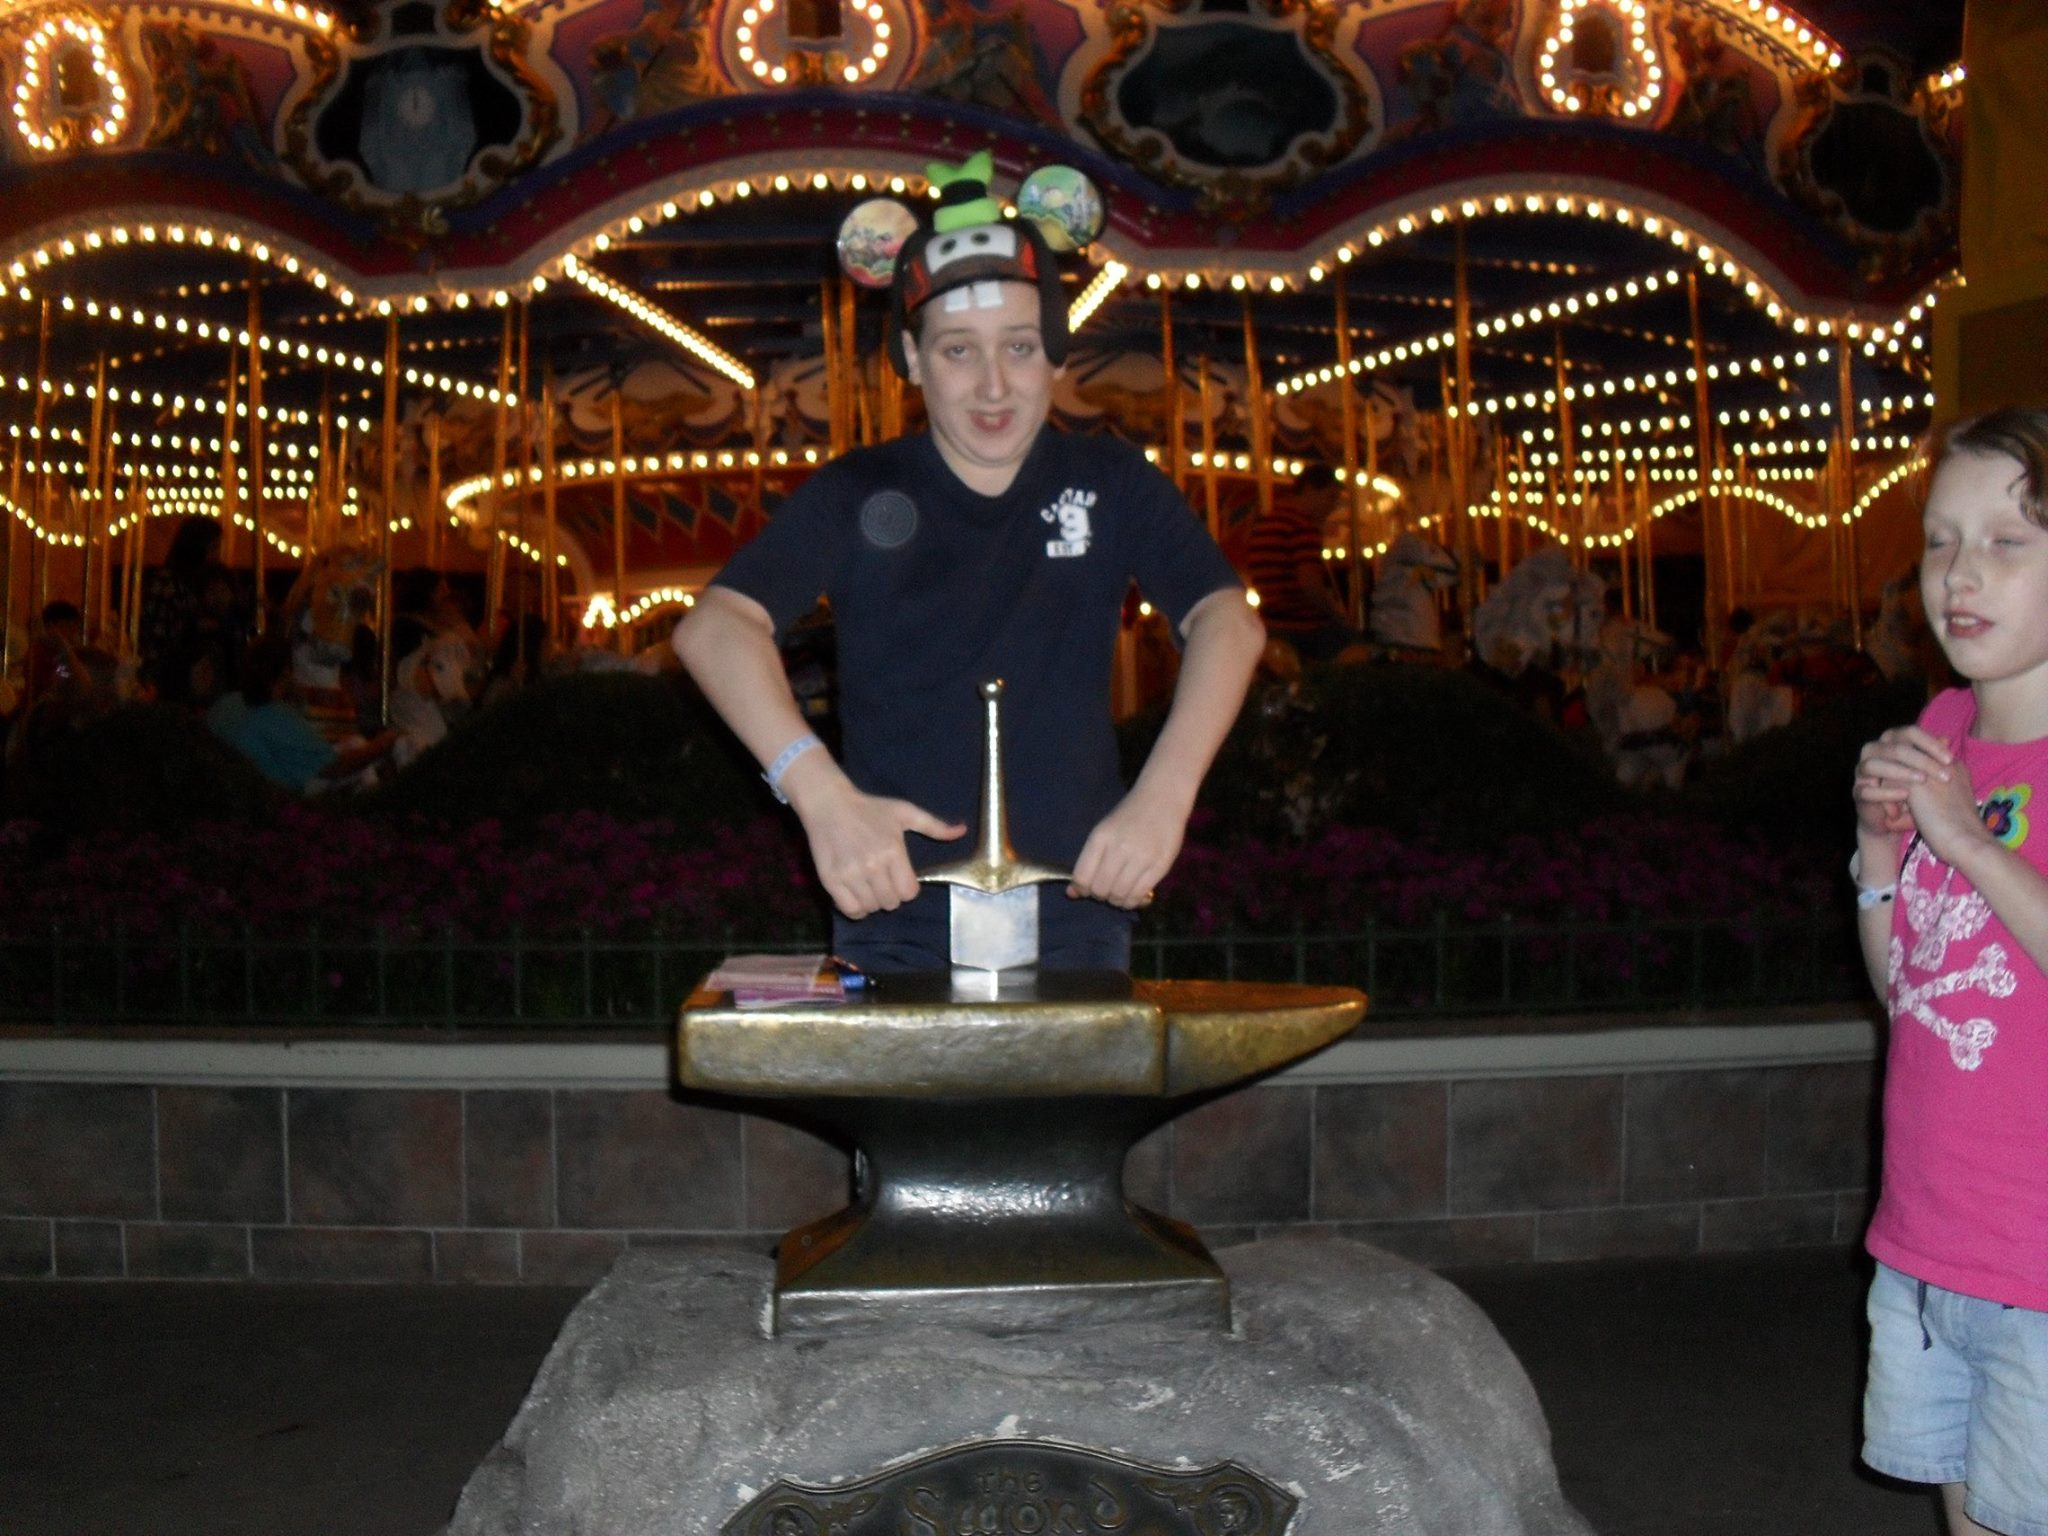 Me with the Sword in the Stone(2011 edition)